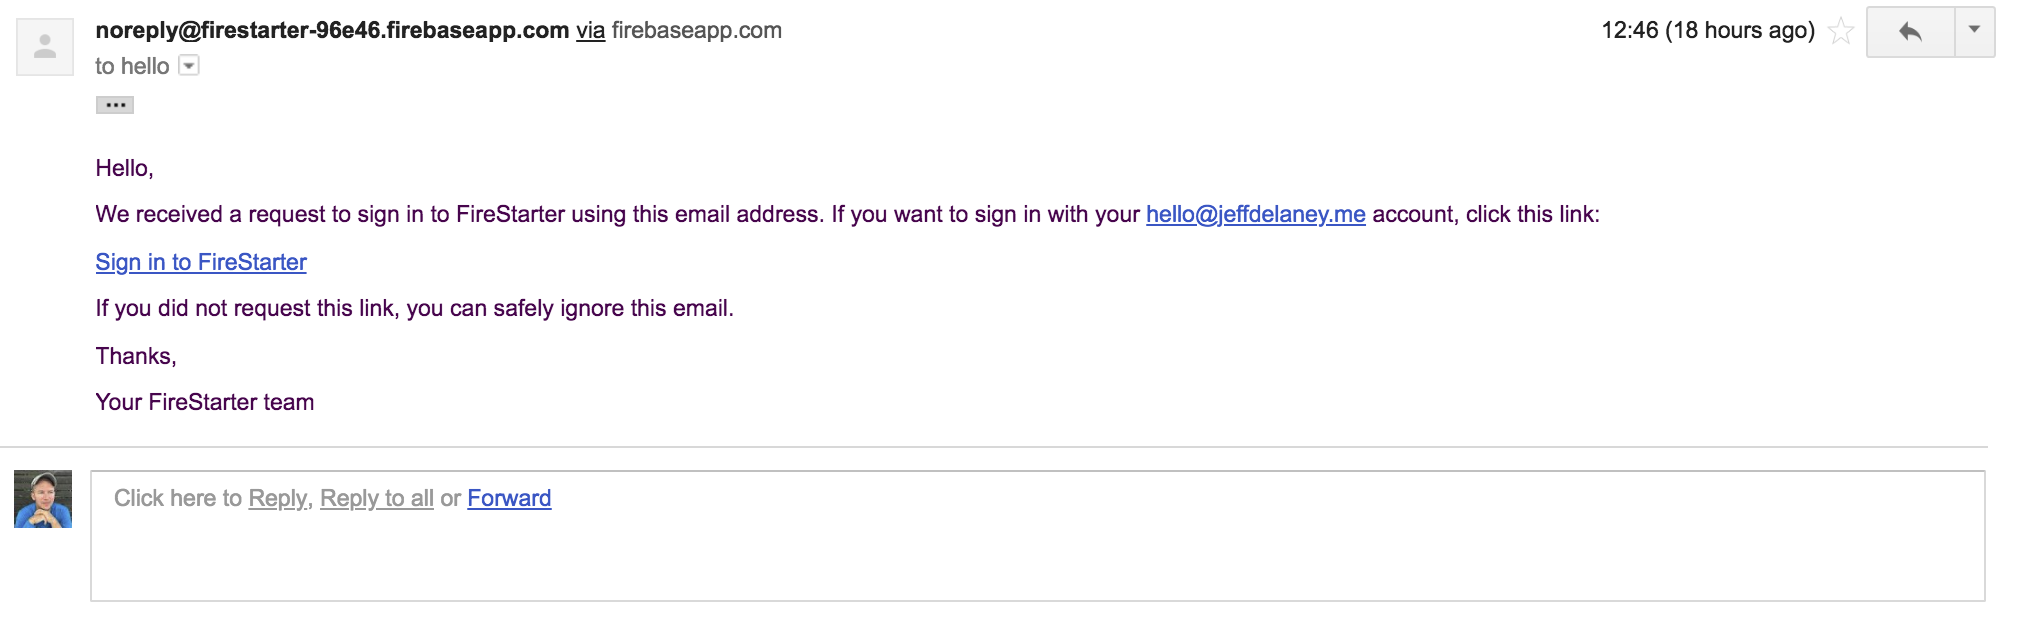 Auth email sent by Firebase